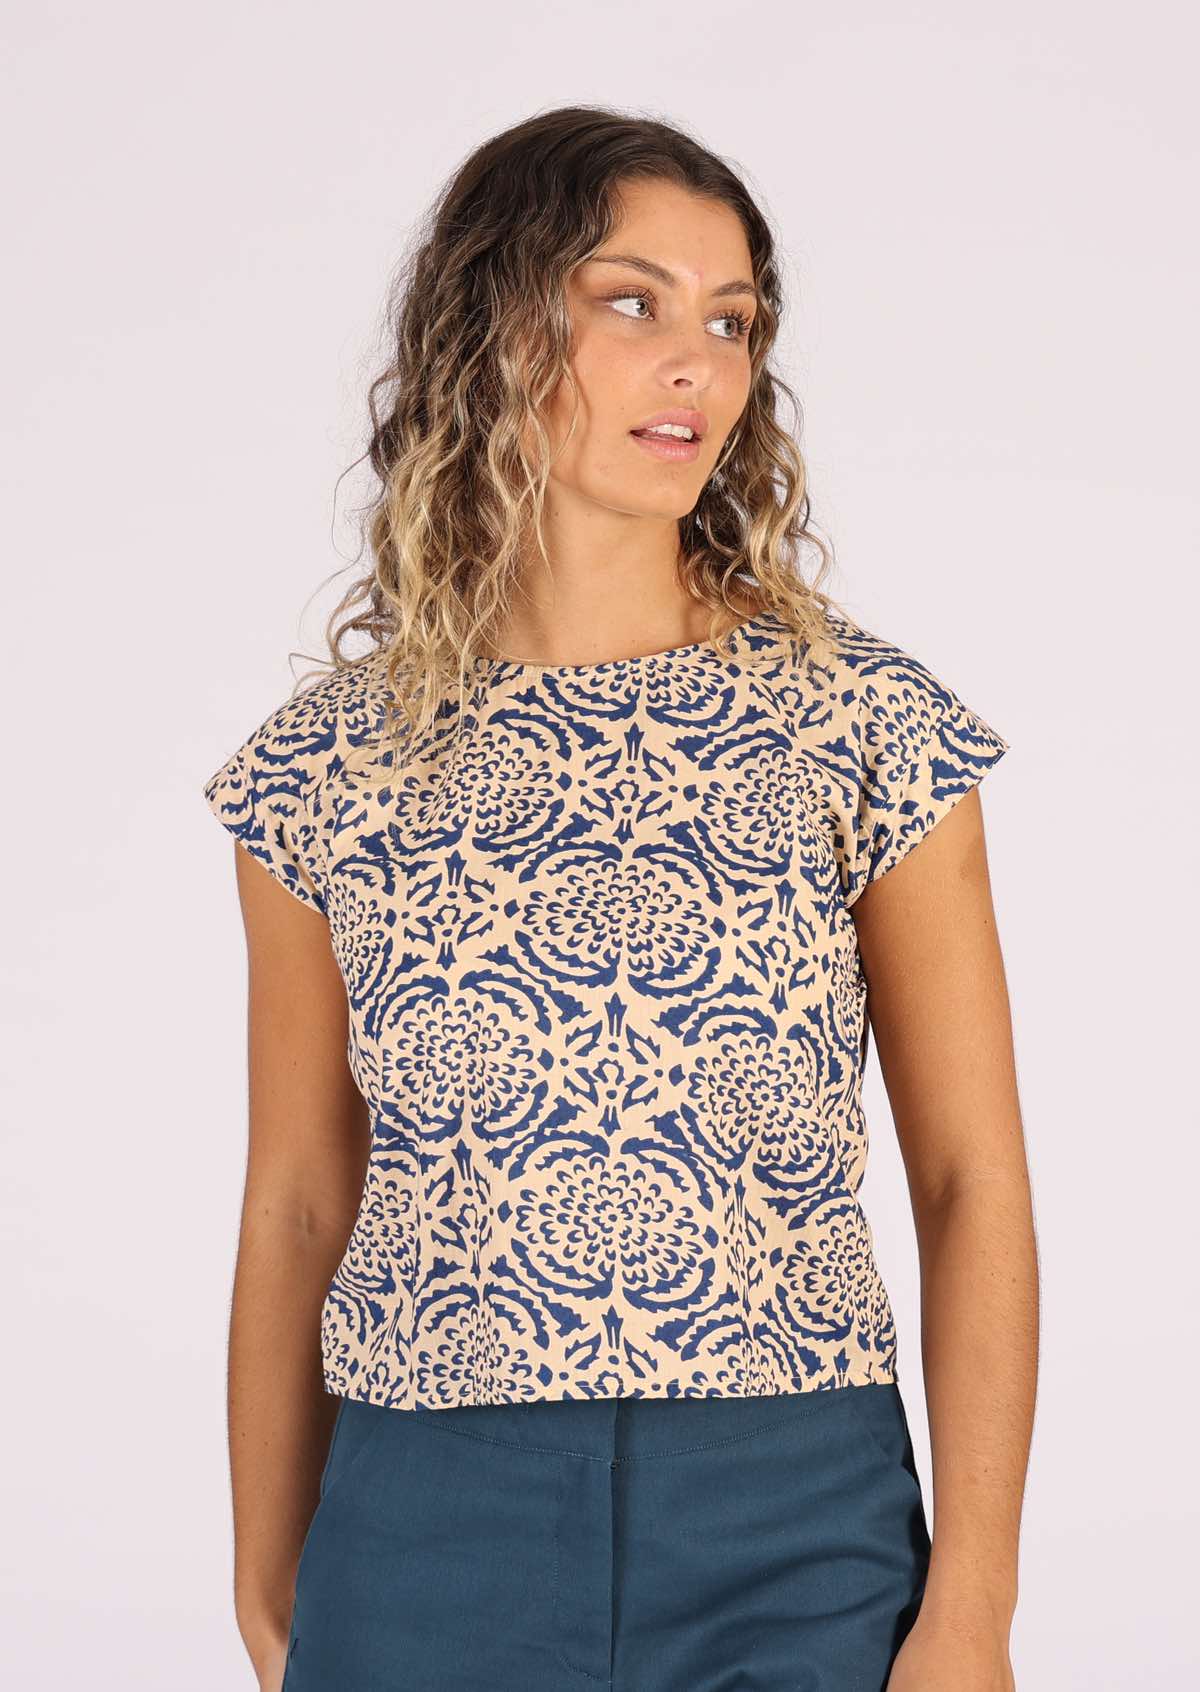 Model wears simple cotton top with flower print